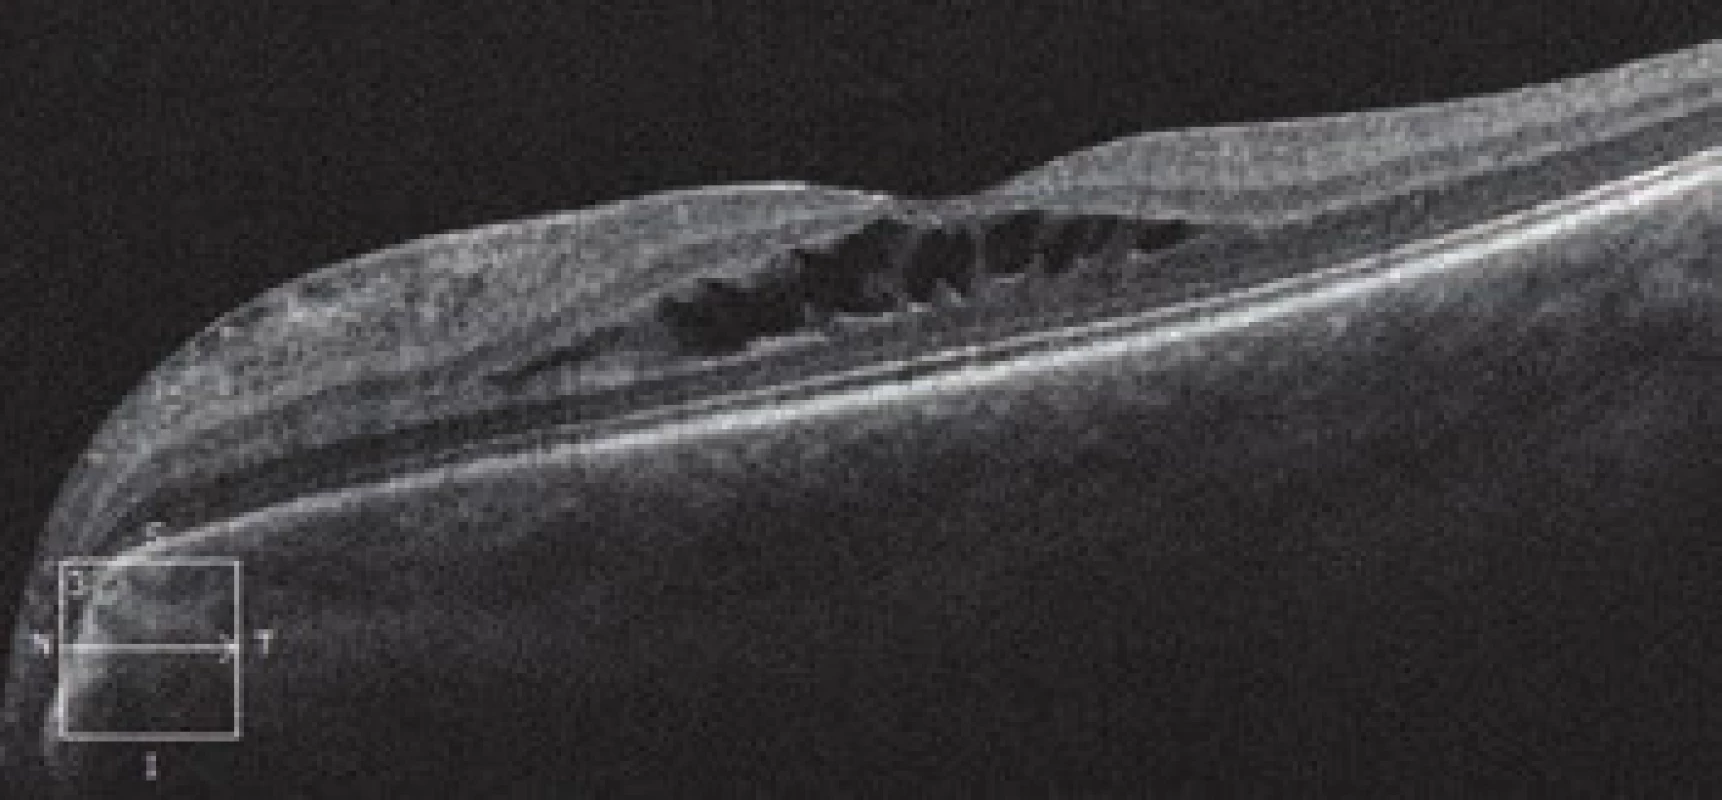 HD-OCT: Linear horizontal transfoveolar scan of left
eye with image of schisis-like maculopathy, with separation
in the region of central retinal layers